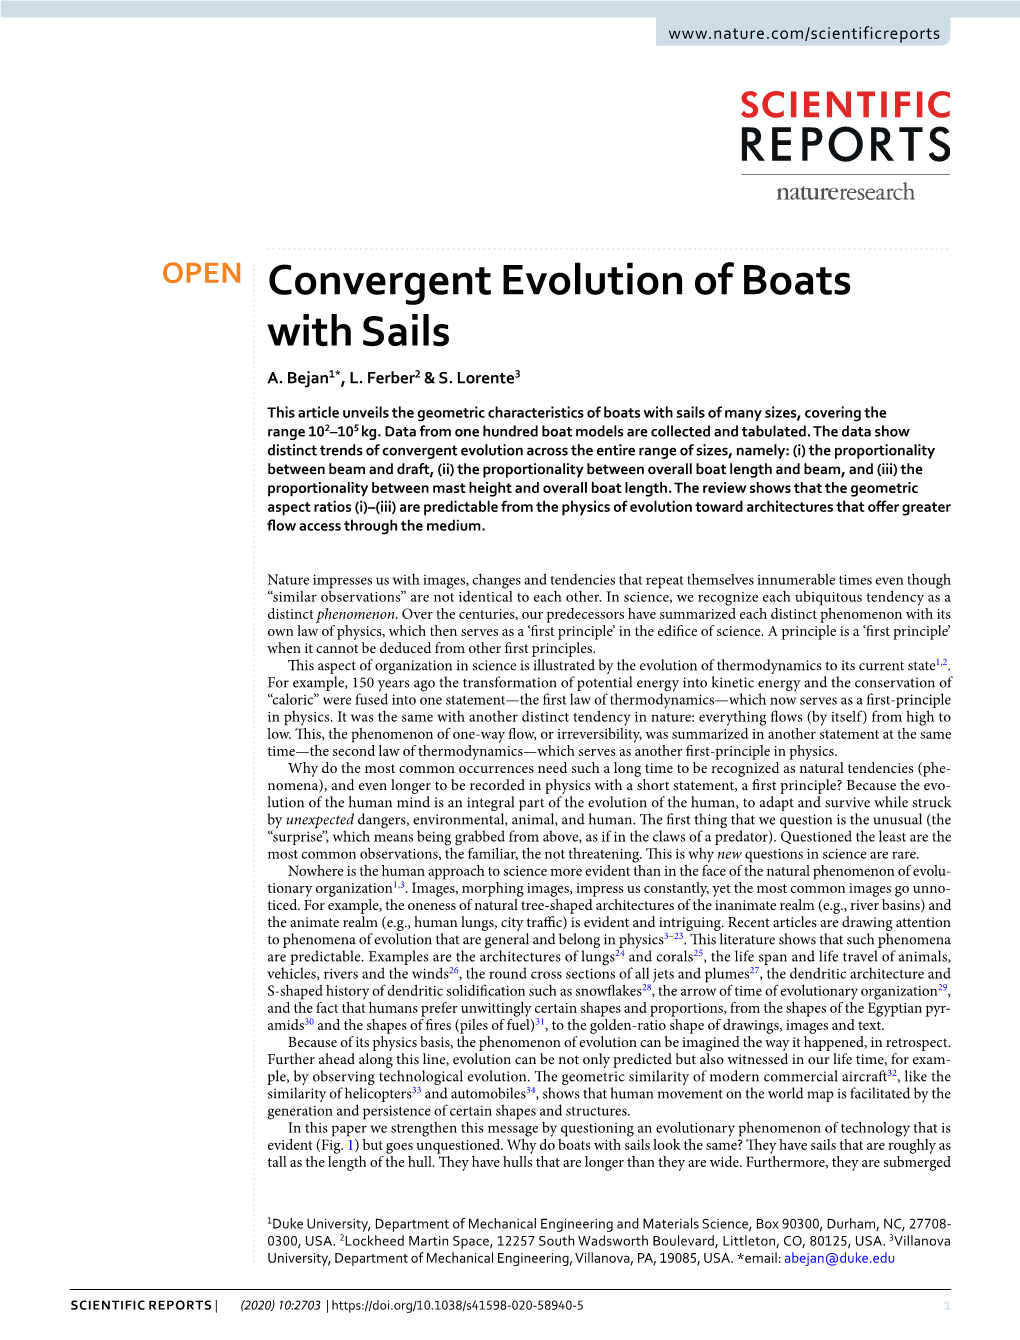 Convergent Evolution of Boats with Sails A